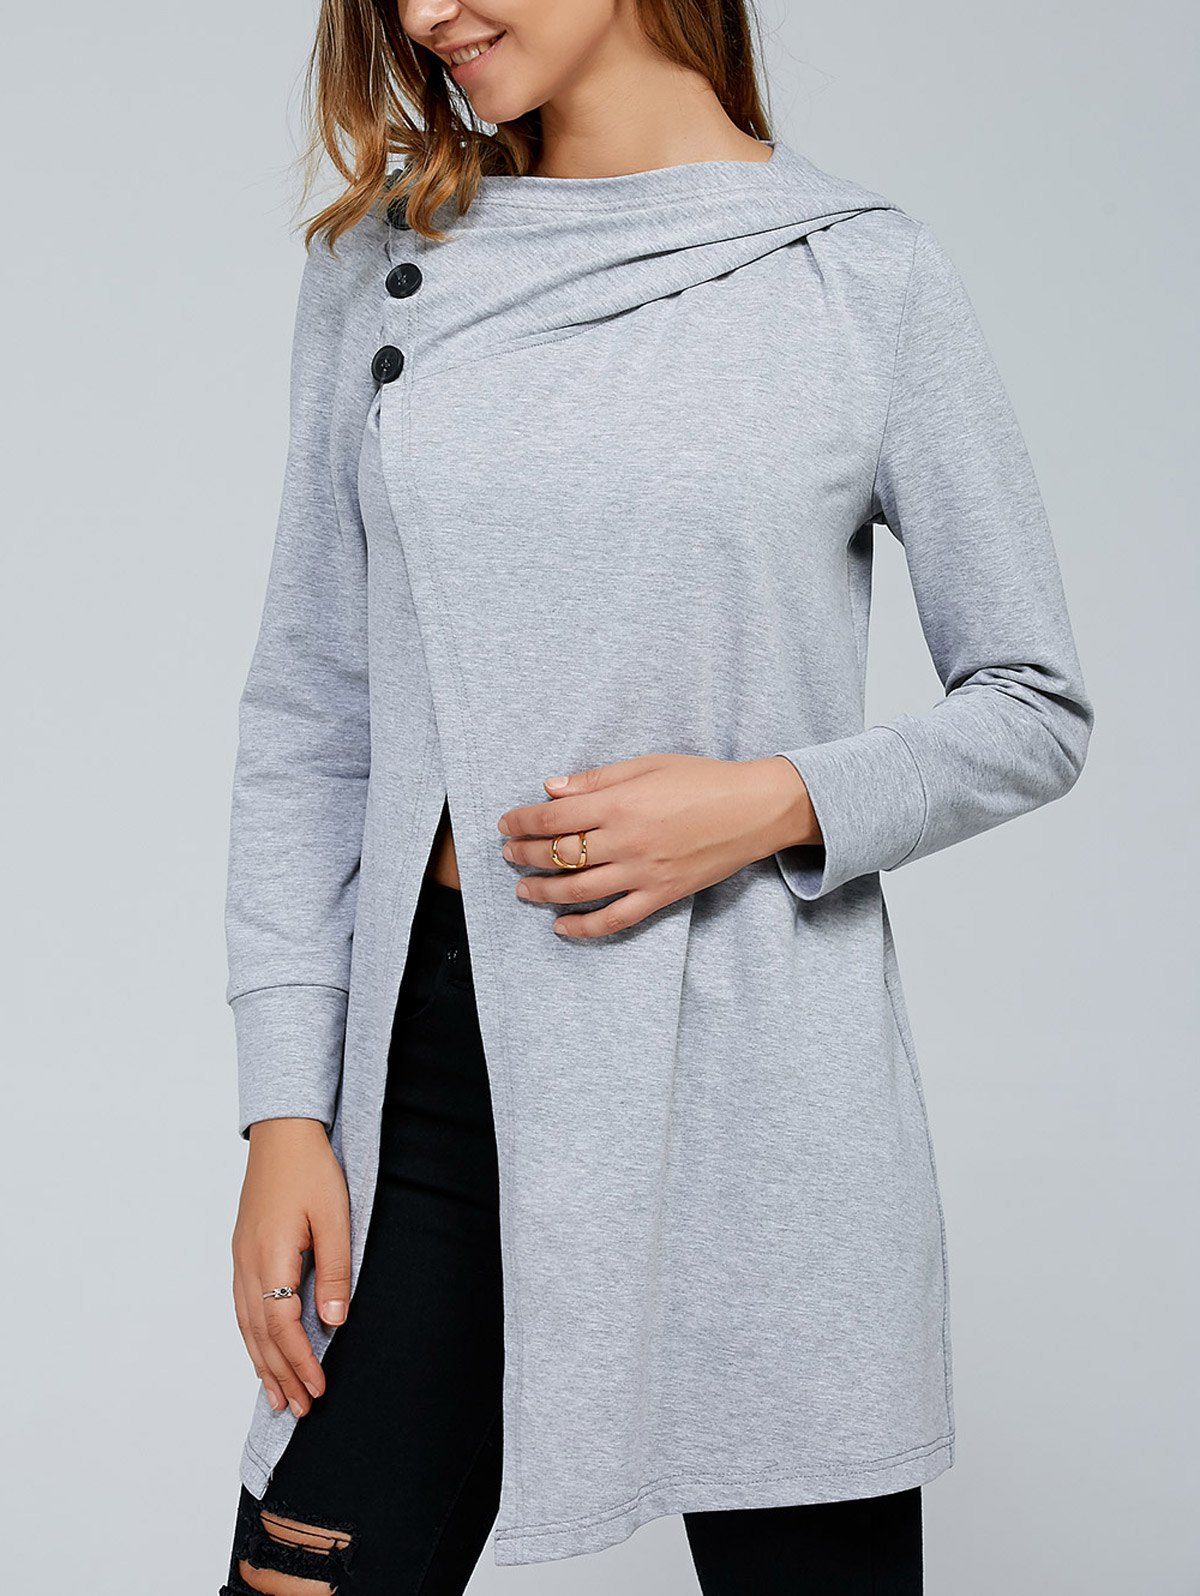 Inclined Button Front Slit Hoodie, LIGHT GRAY, M in Sweatshirts & Hoodies | 0